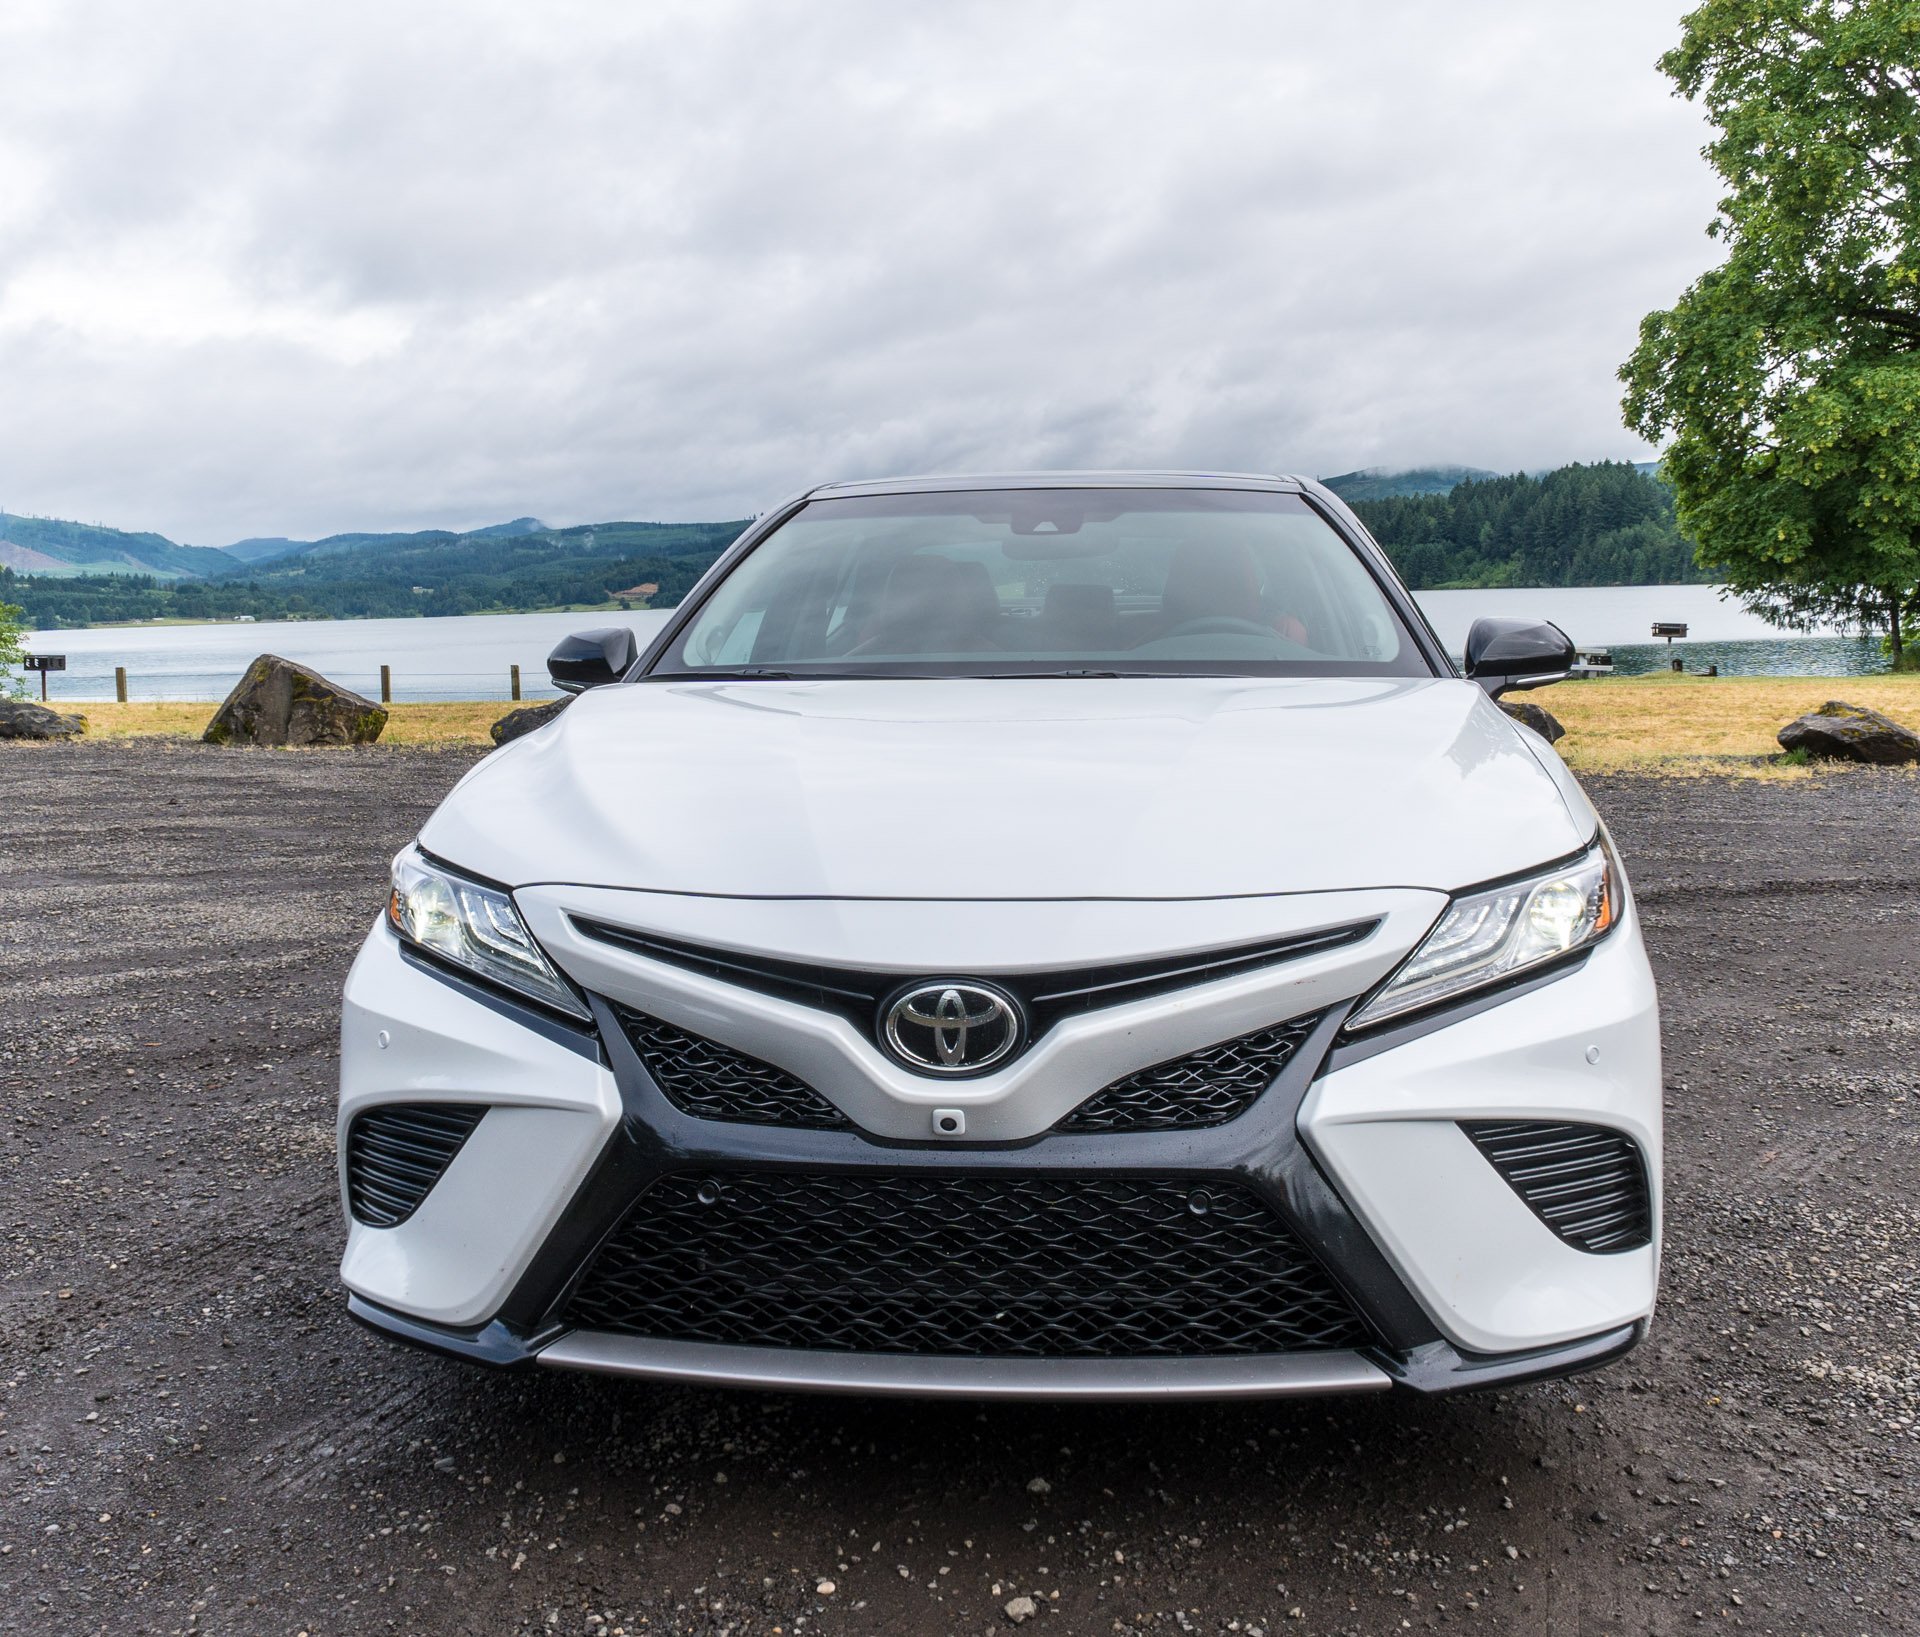 2018 Toyota Camry First Drive Review: Say Bye, Bye Bland